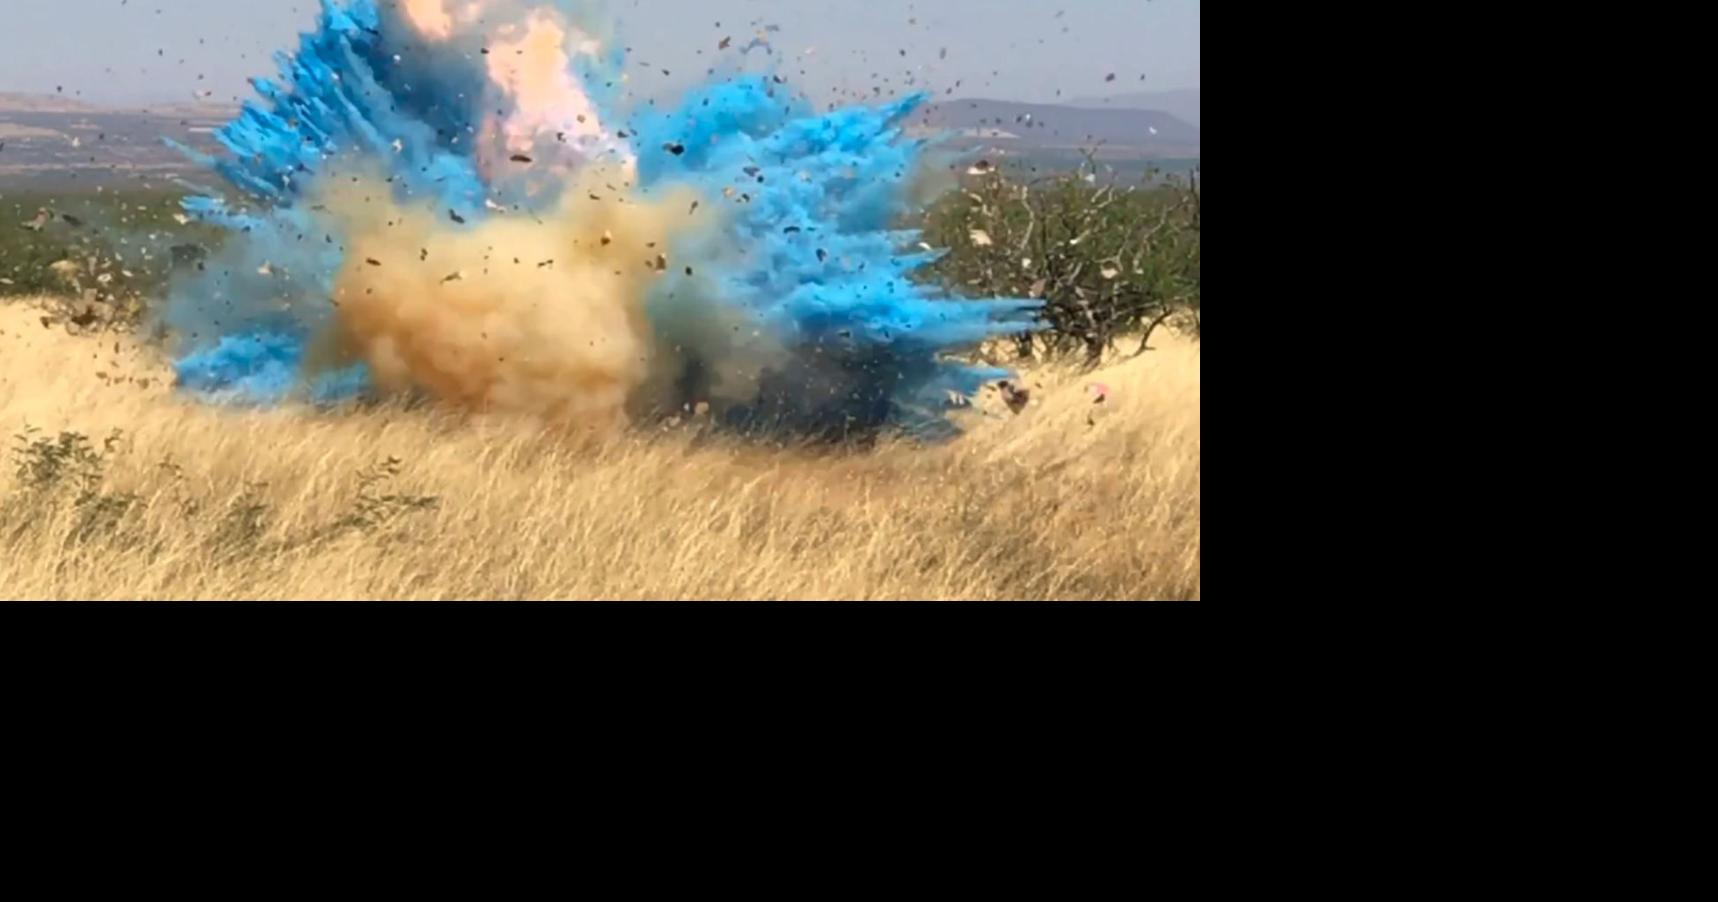 Officials Release Video From Gender Reveal Party That Ignited A 47000 Acre Wildfire News